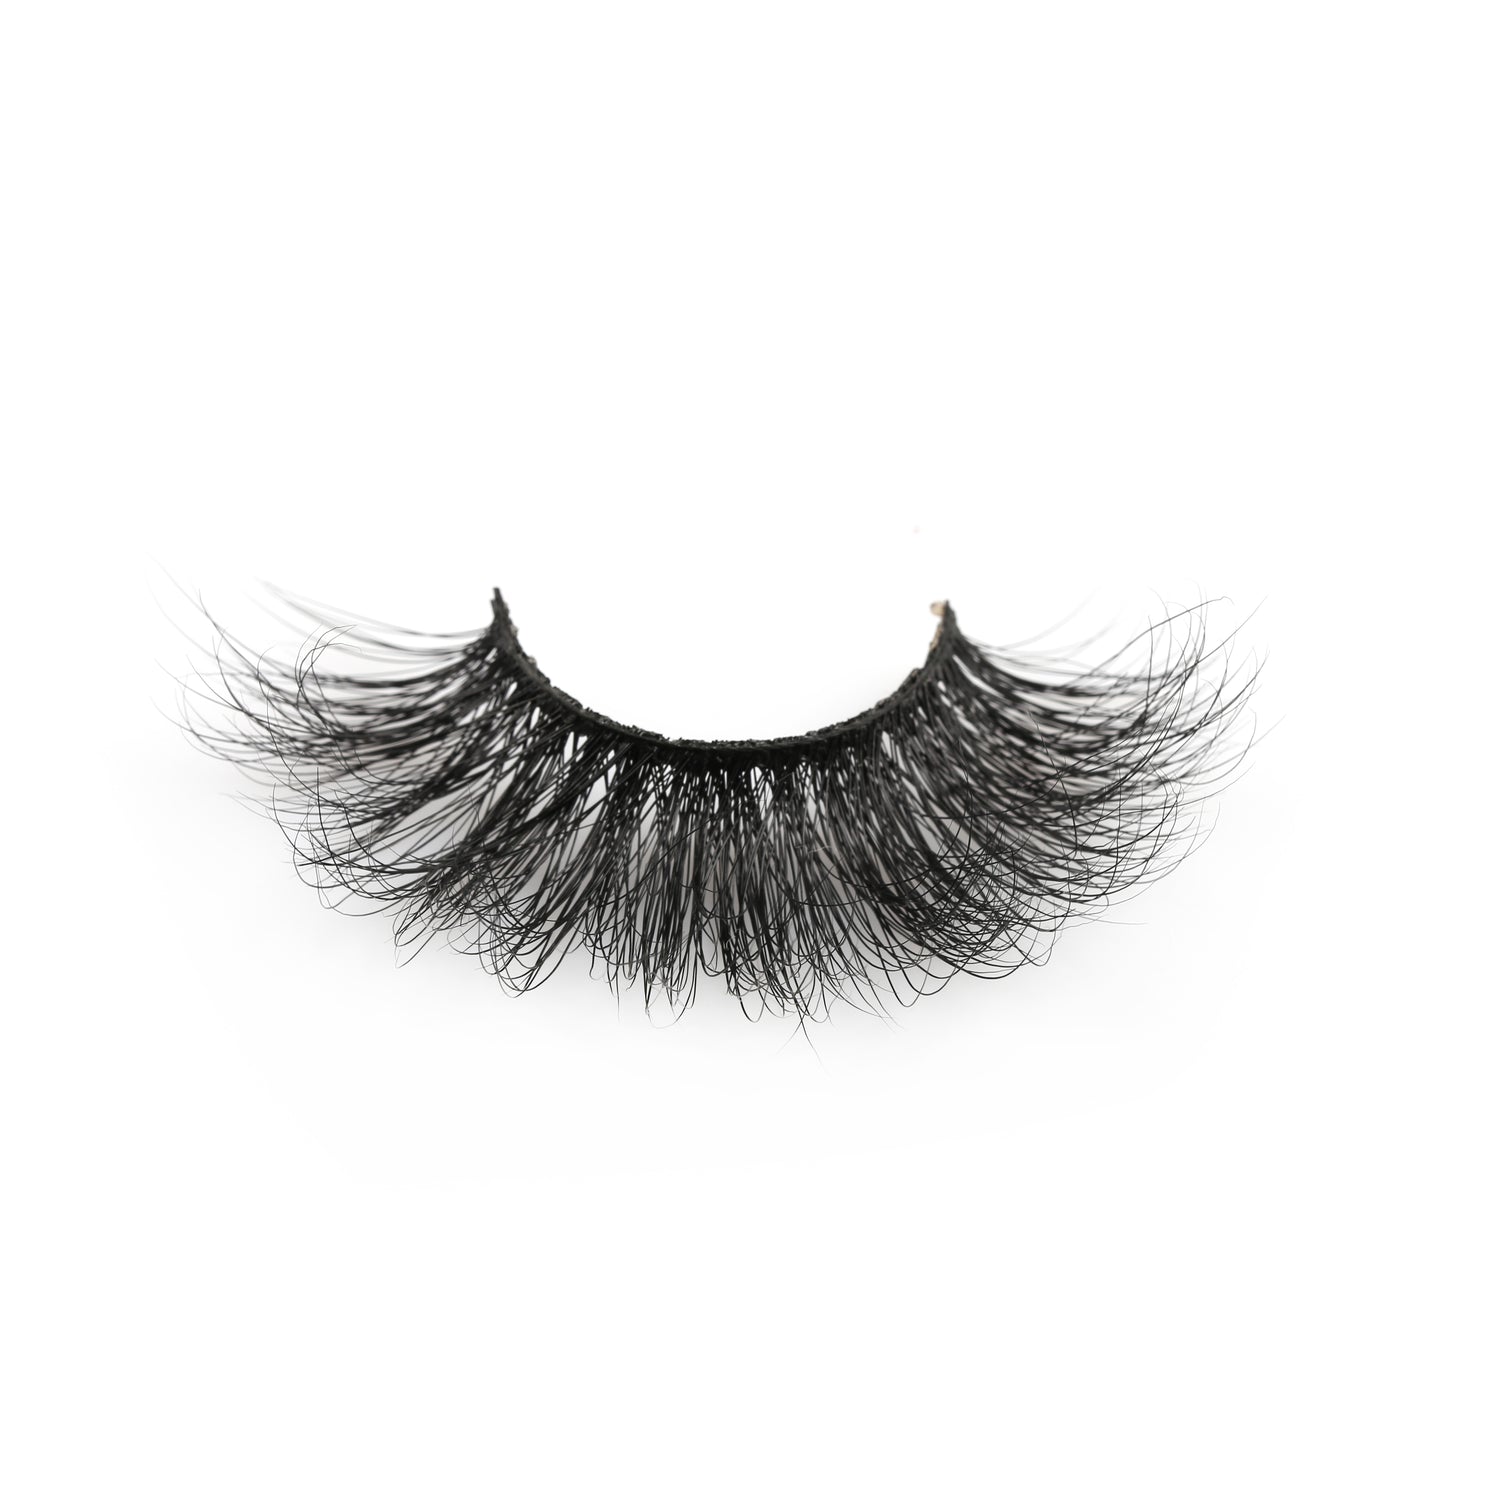 NEW!! VIP Long Dramatic Mink Lashes!! - VIP Extensions